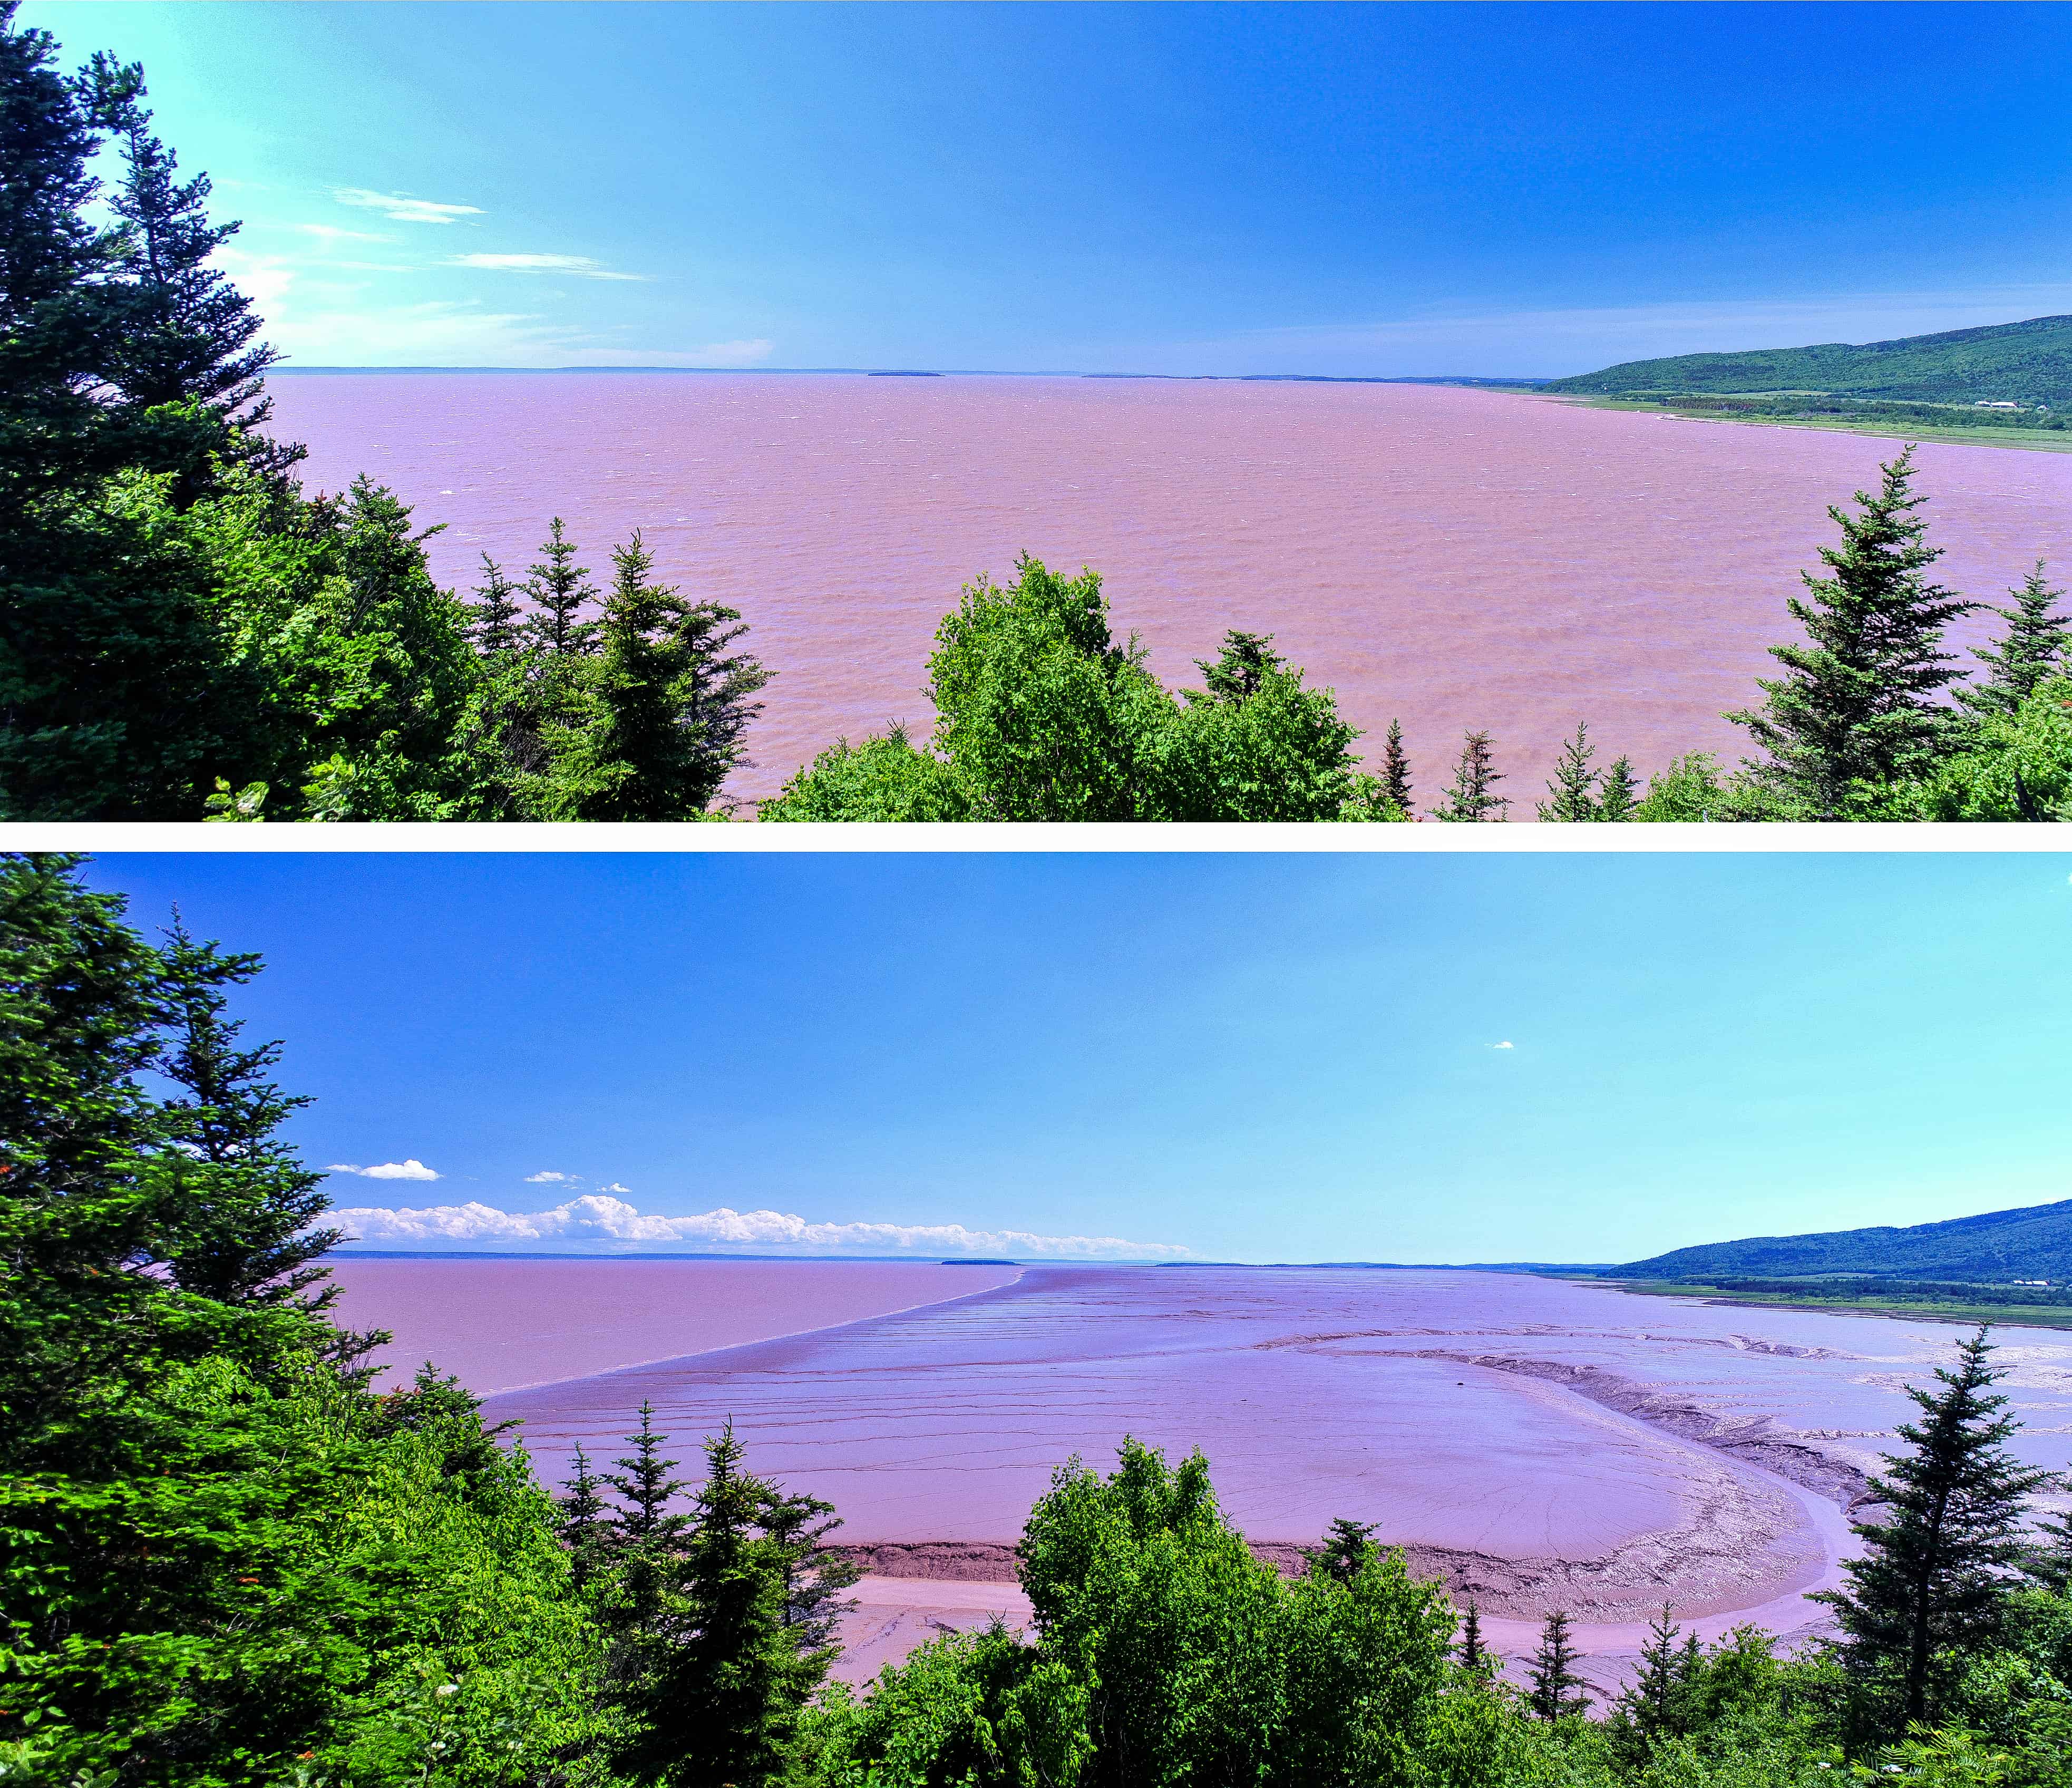 High and low tide hopewell rocks bay of fundy